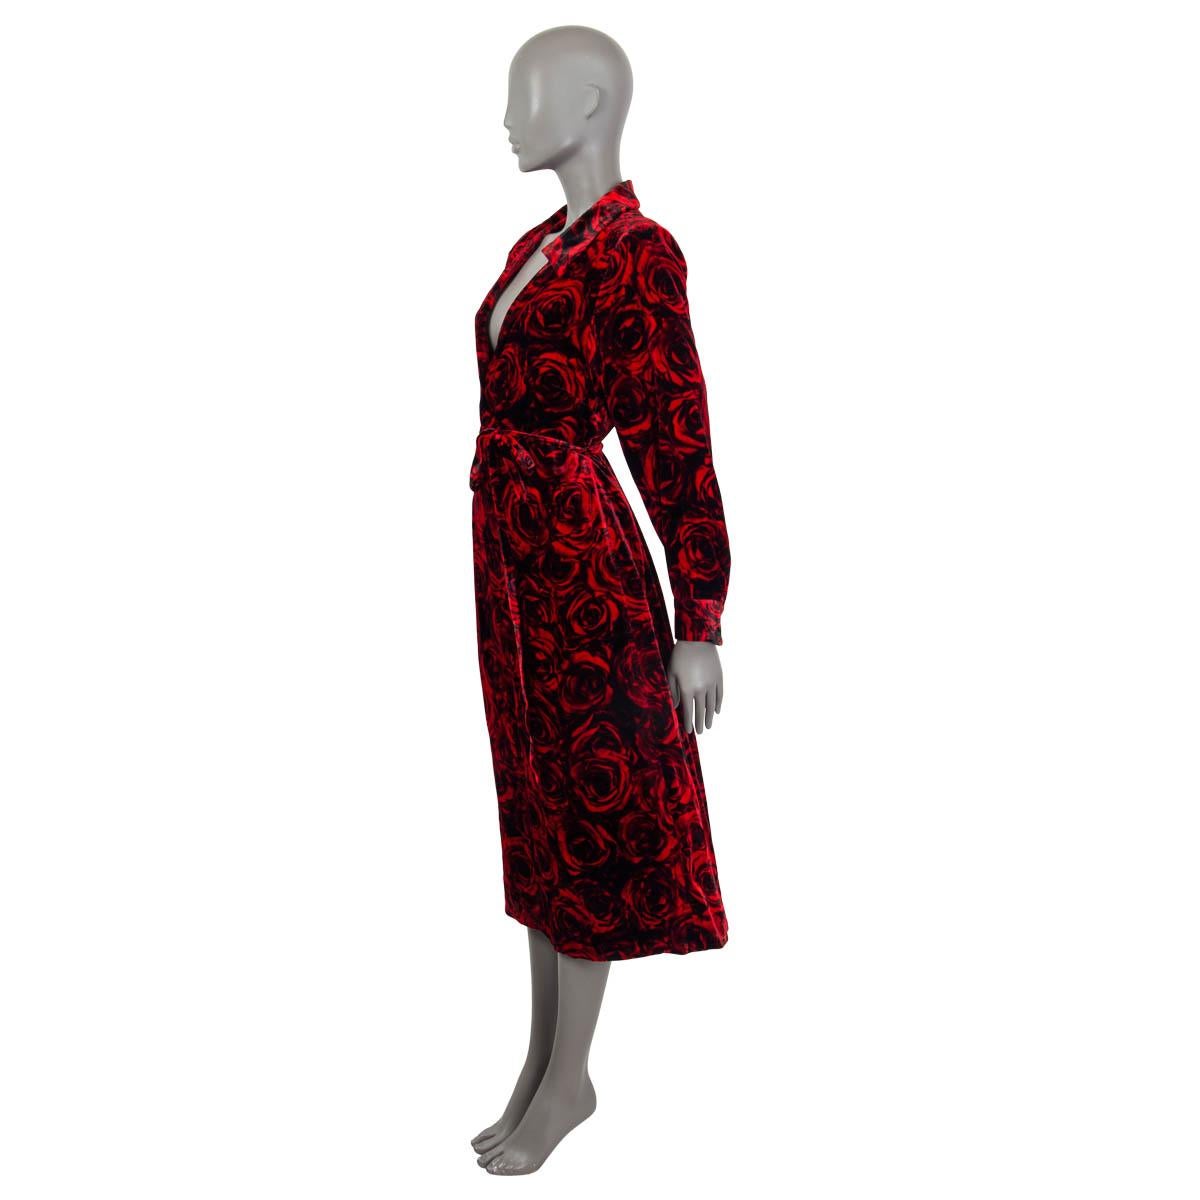 100% authentic Dries Van Noten Fall '21 belted midi dress in red and black rose printed plush velvet in viscose (62%) and silk (18%). The dress features long sleeves, a low neckline and padded shoulders. Has been worn and is in excellent condition.